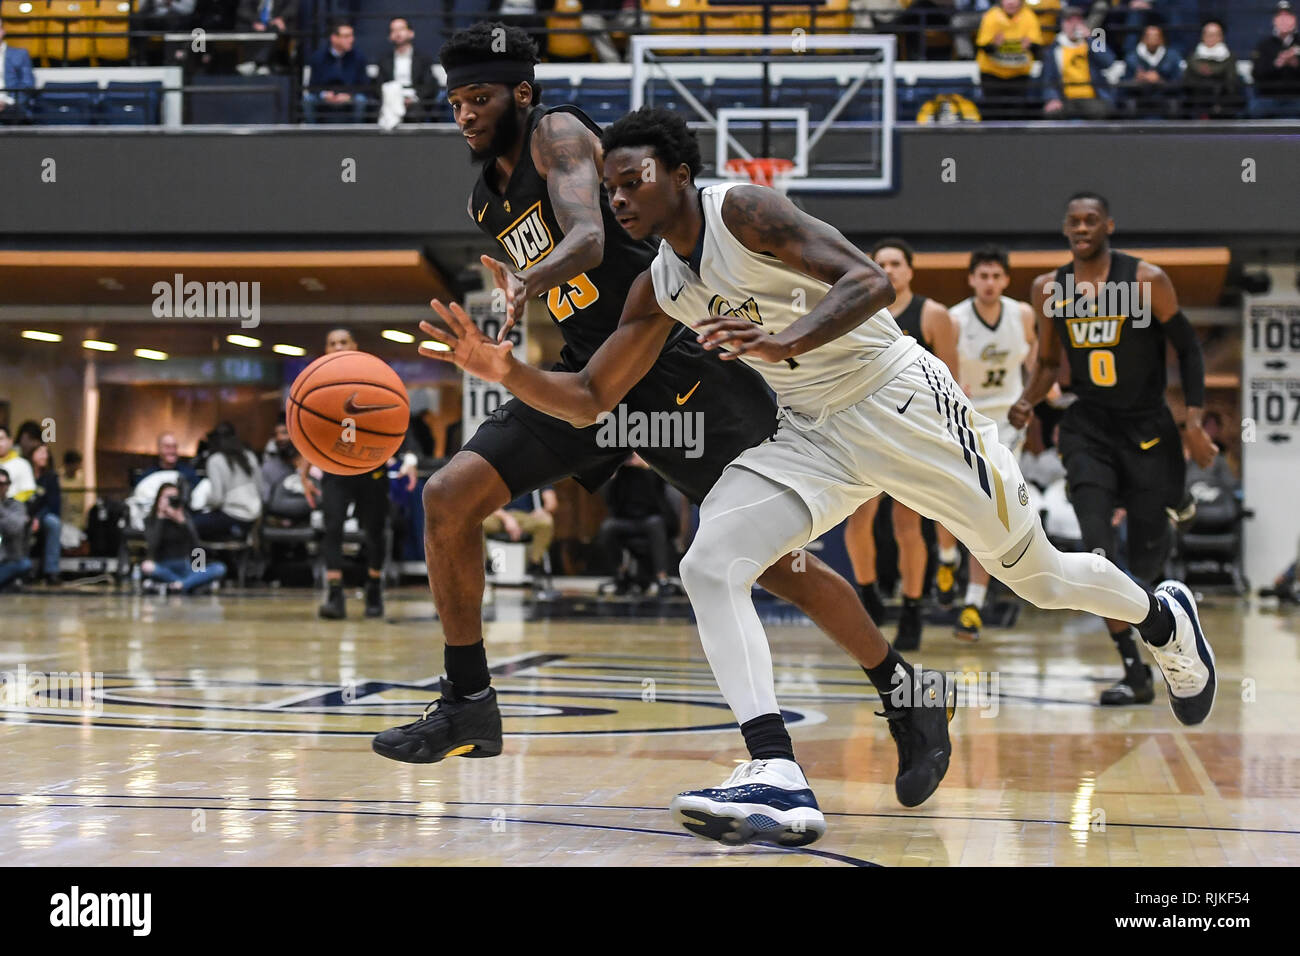 Washington, DC, USA. 11th Jan, 2016. ISSAC VANN (23) and TERRY NOLAN JR (1) fight for control over the basketball during the game held at the Charles E. Smith Center in Washington, DC. Credit: Amy Sanderson/ZUMA Wire/Alamy Live News Stock Photo